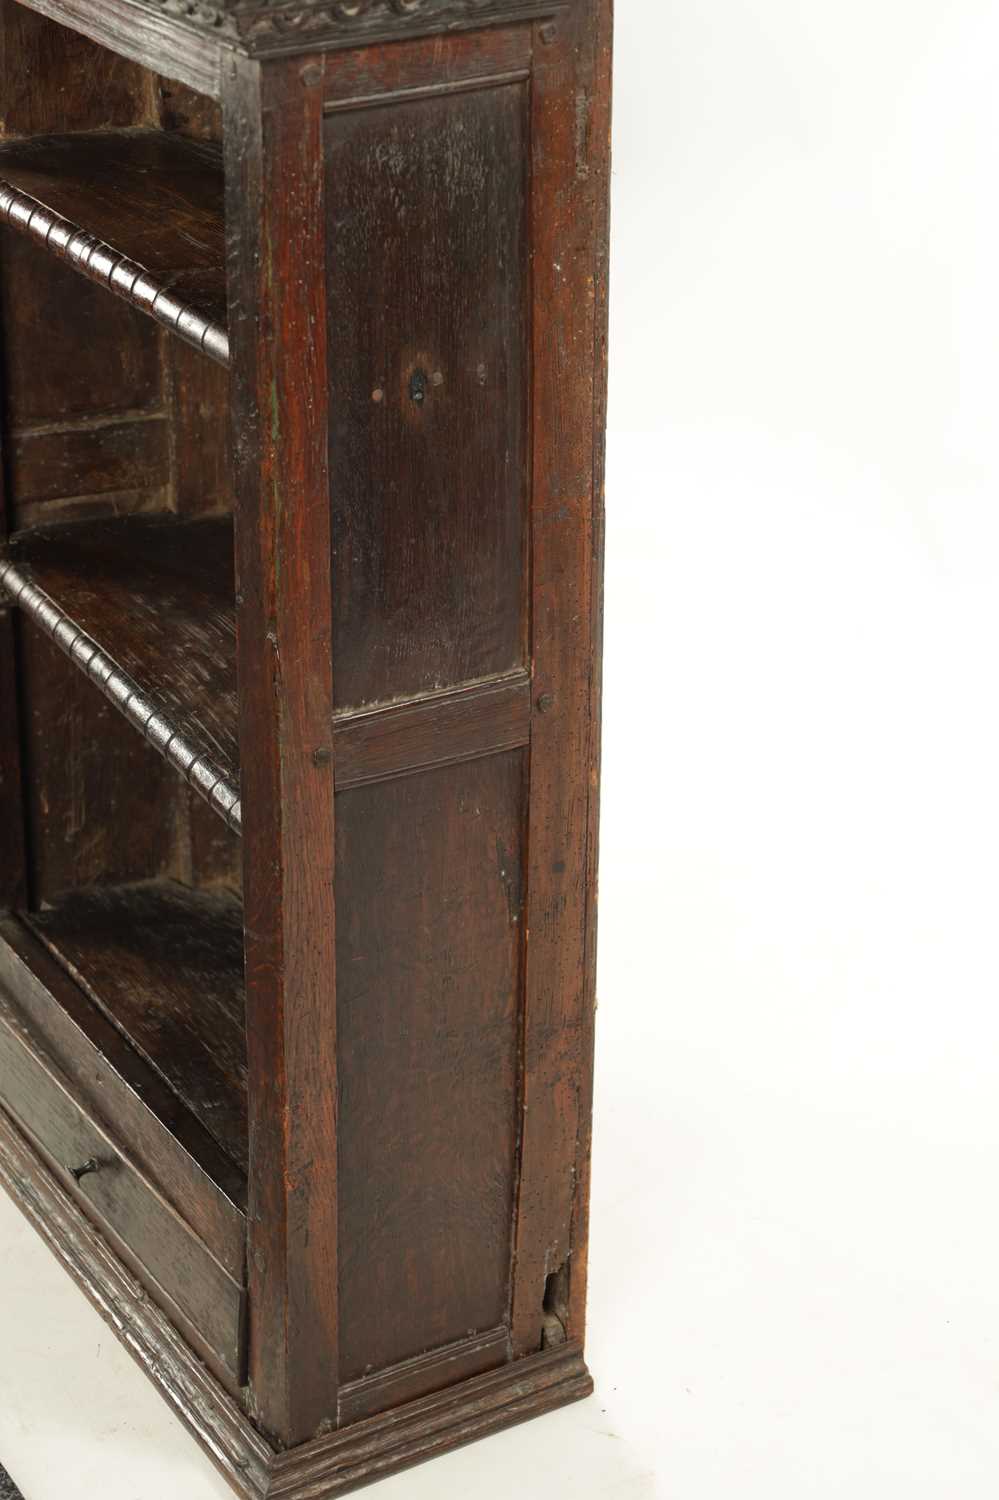 A 17TH CENTURY OAK HANGING OPEN SPICE RACK WITH FITTED DRAWER - Image 6 of 8